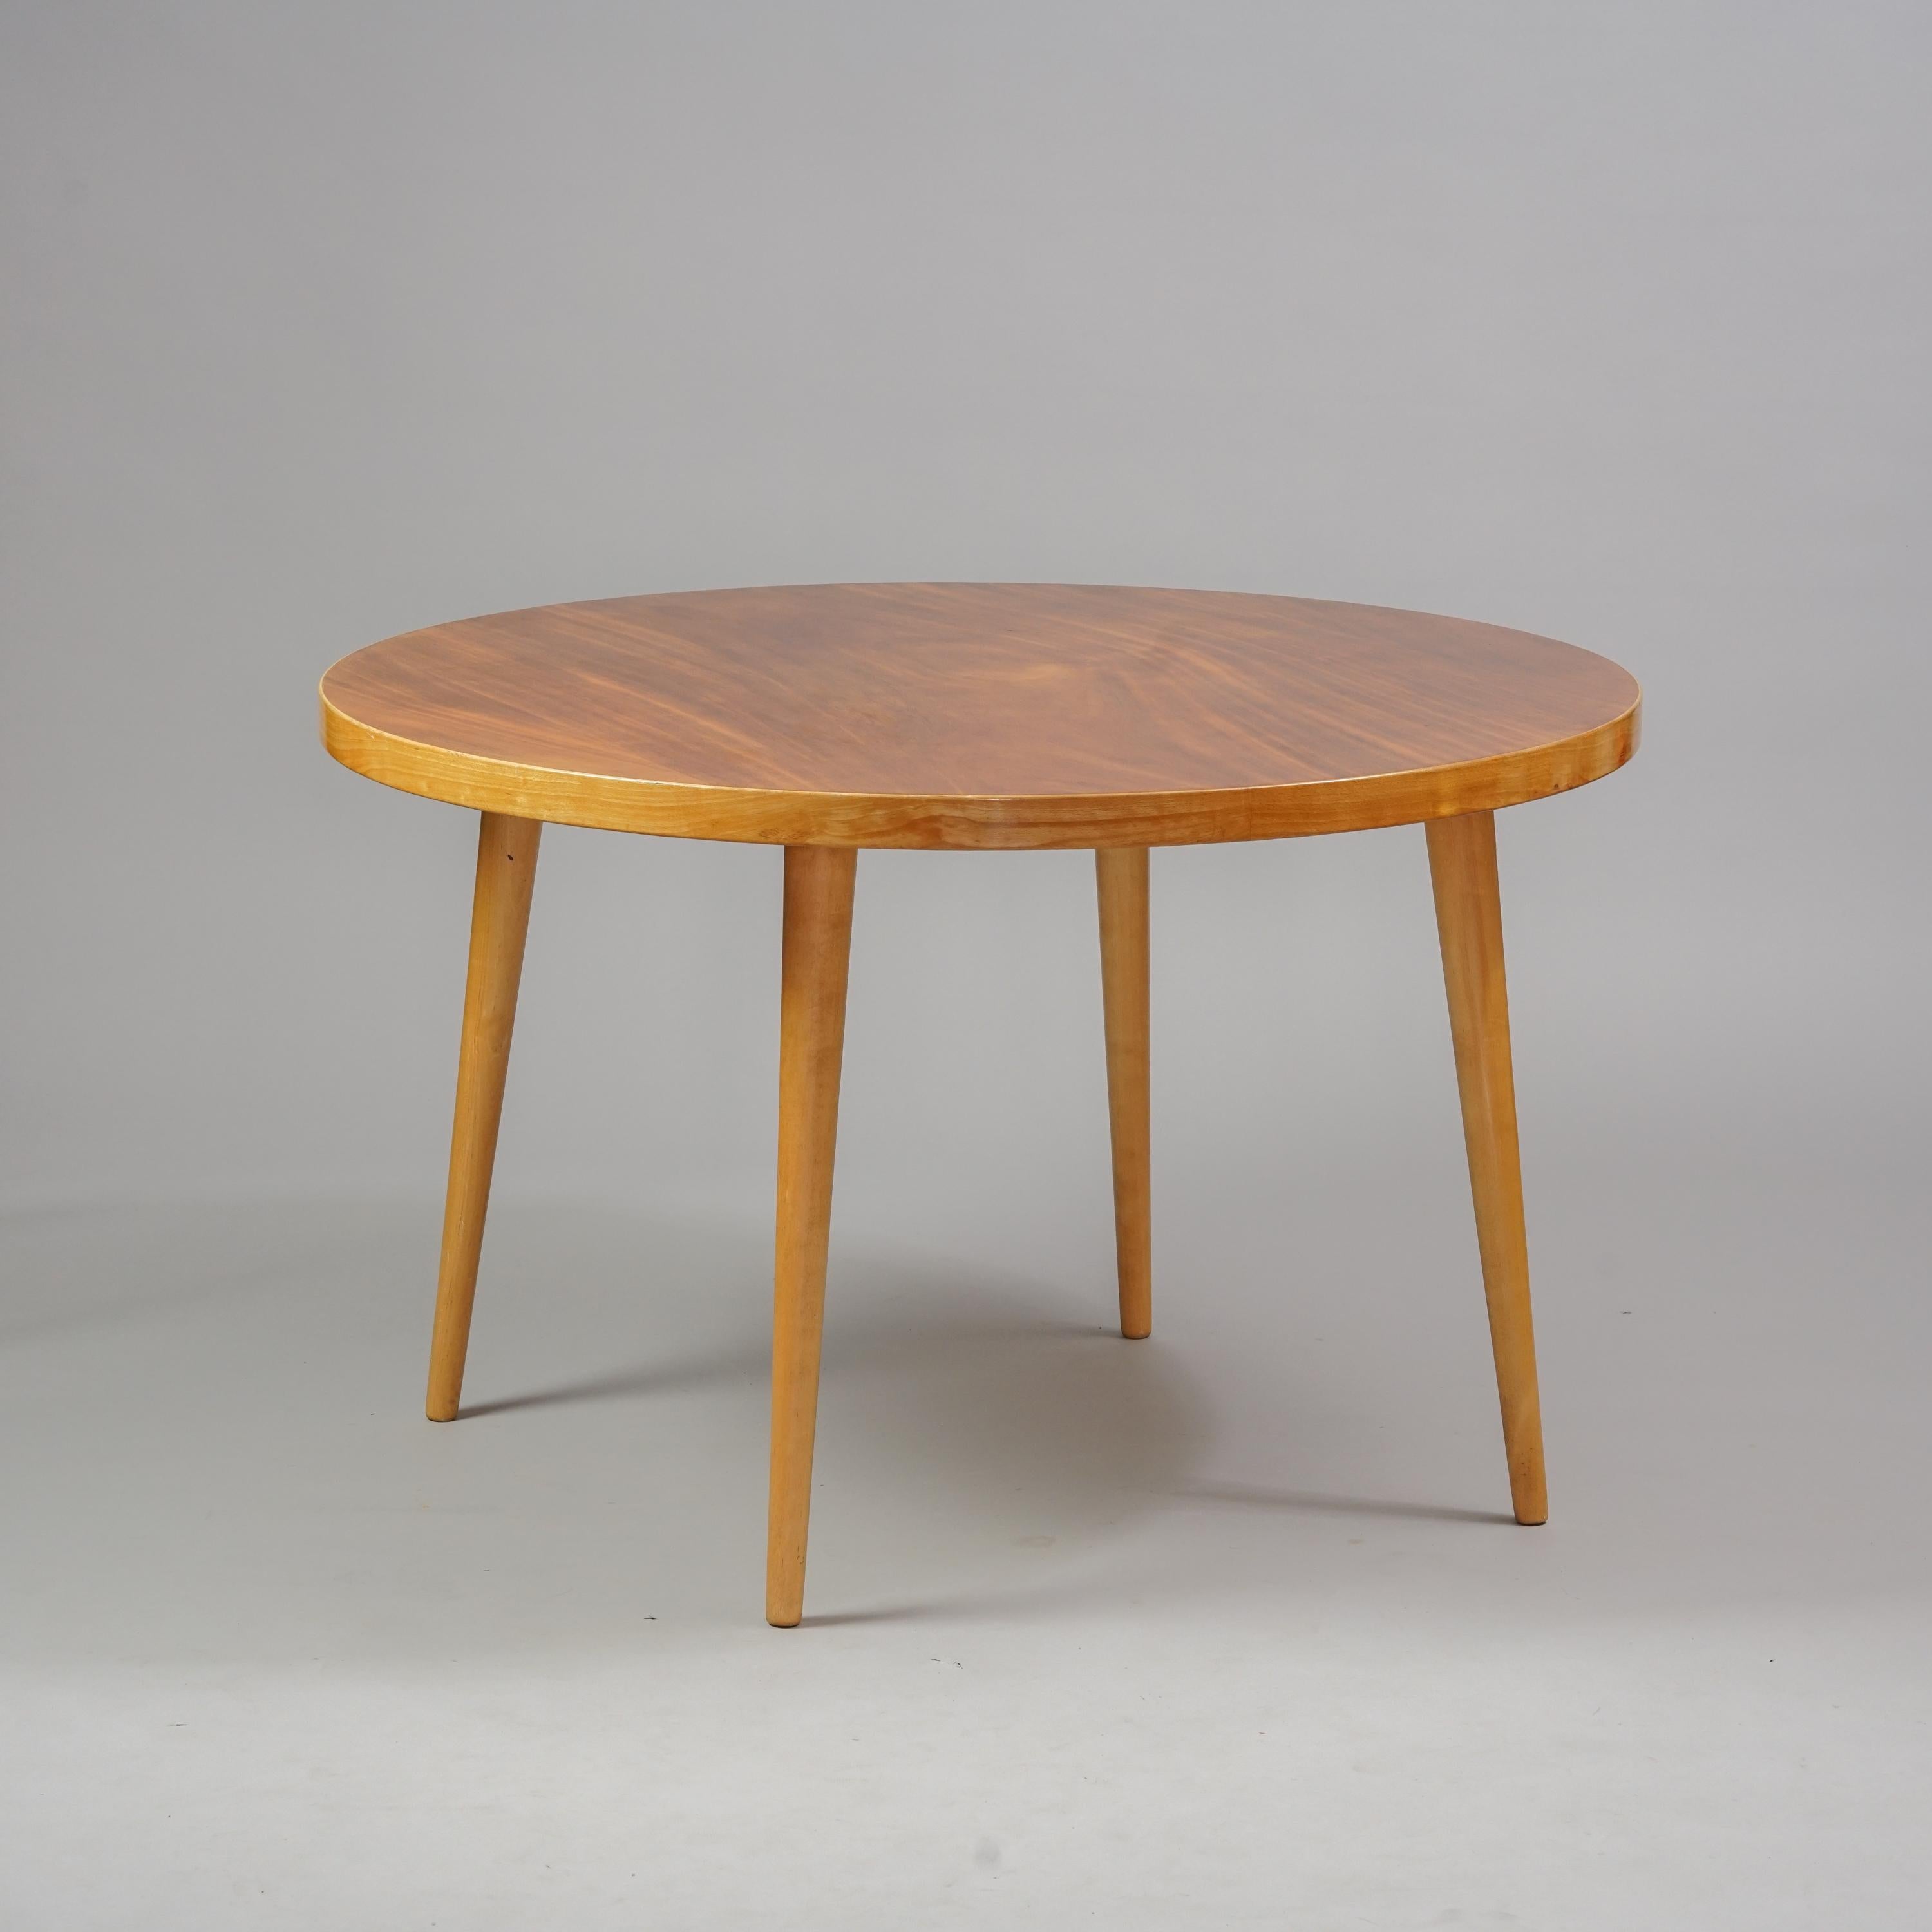 Round dining table by lImari Tapiovaara from the 1940s / 1950s. Birch frame. Good vintage condition, minor wear consistent with age and use. Possibly designed for Domus Academica. Classic Ilmari Tapiovaara design.